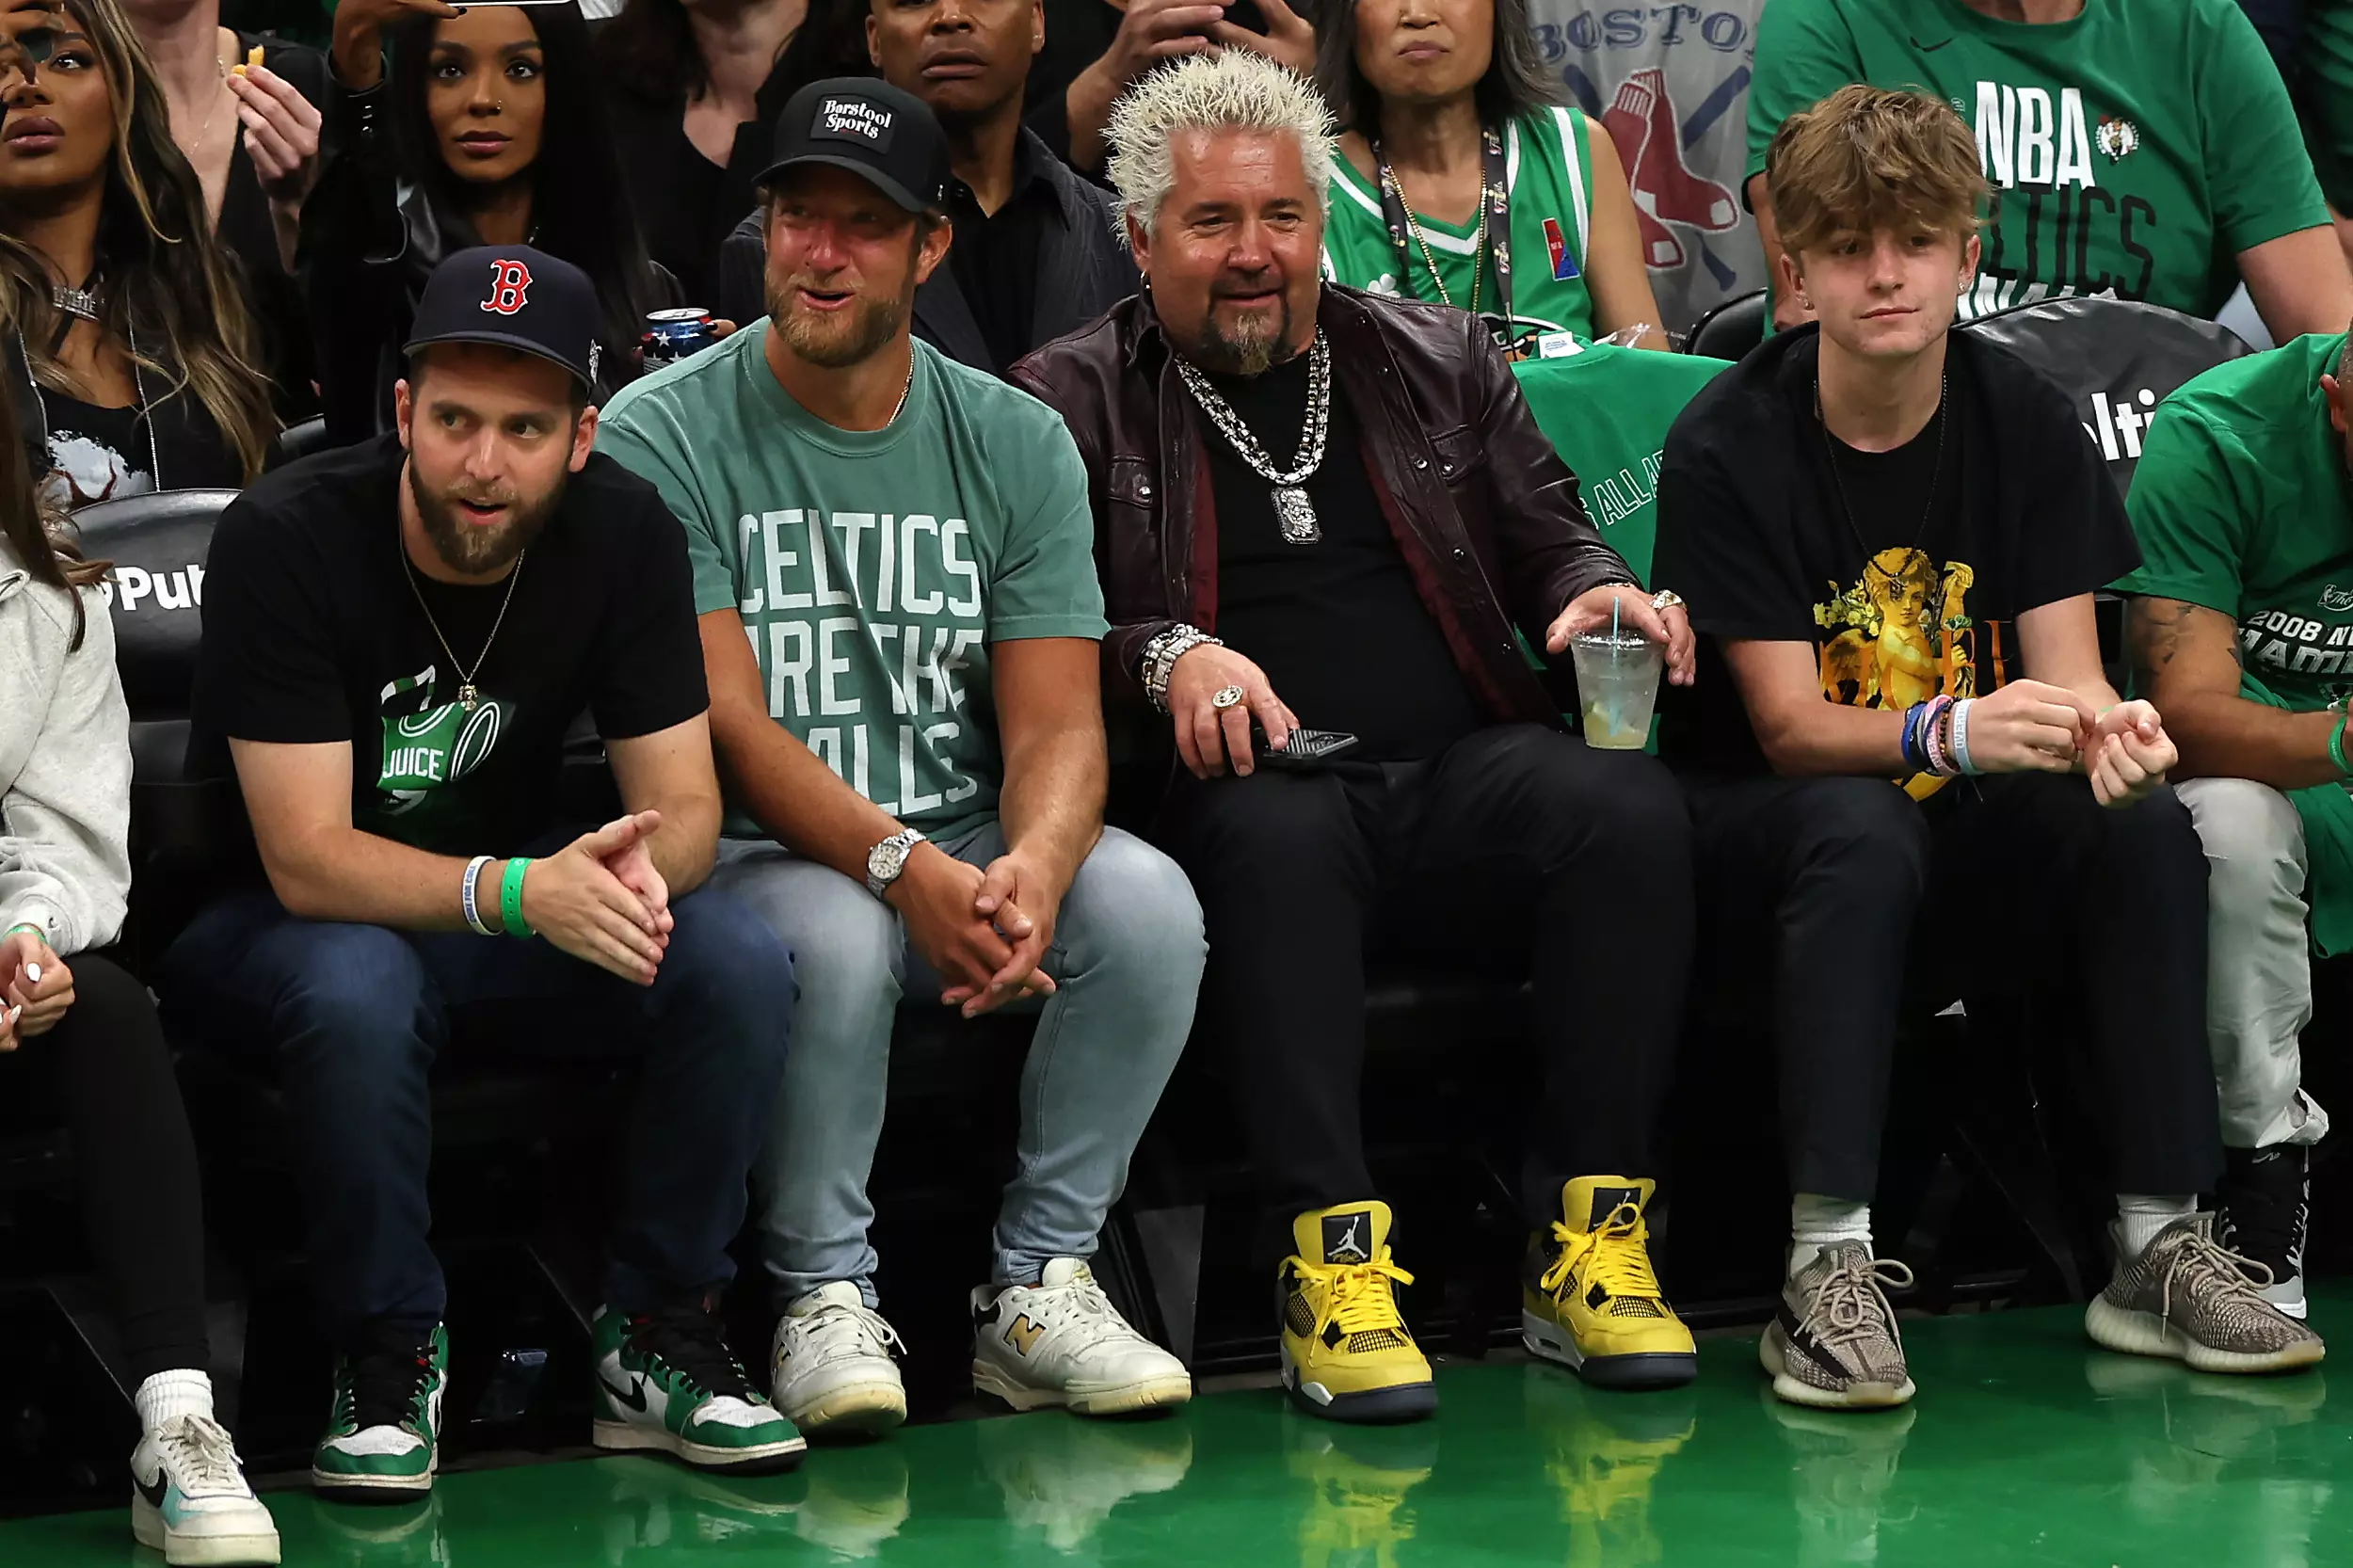 These celebrities are Boston Red Sox, New England Patriots fans